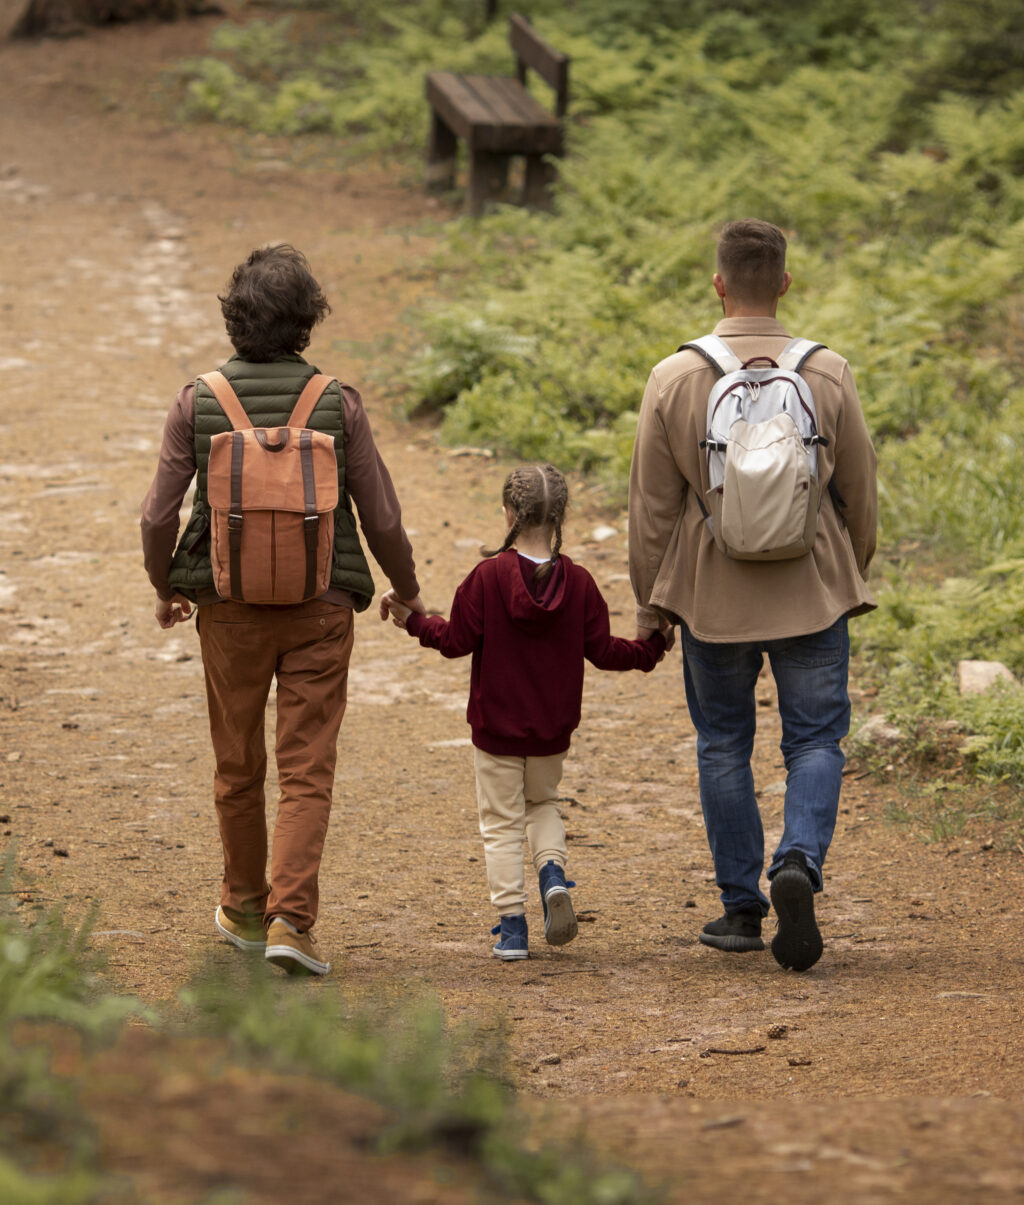 Parents walking on a nature trail with a child.